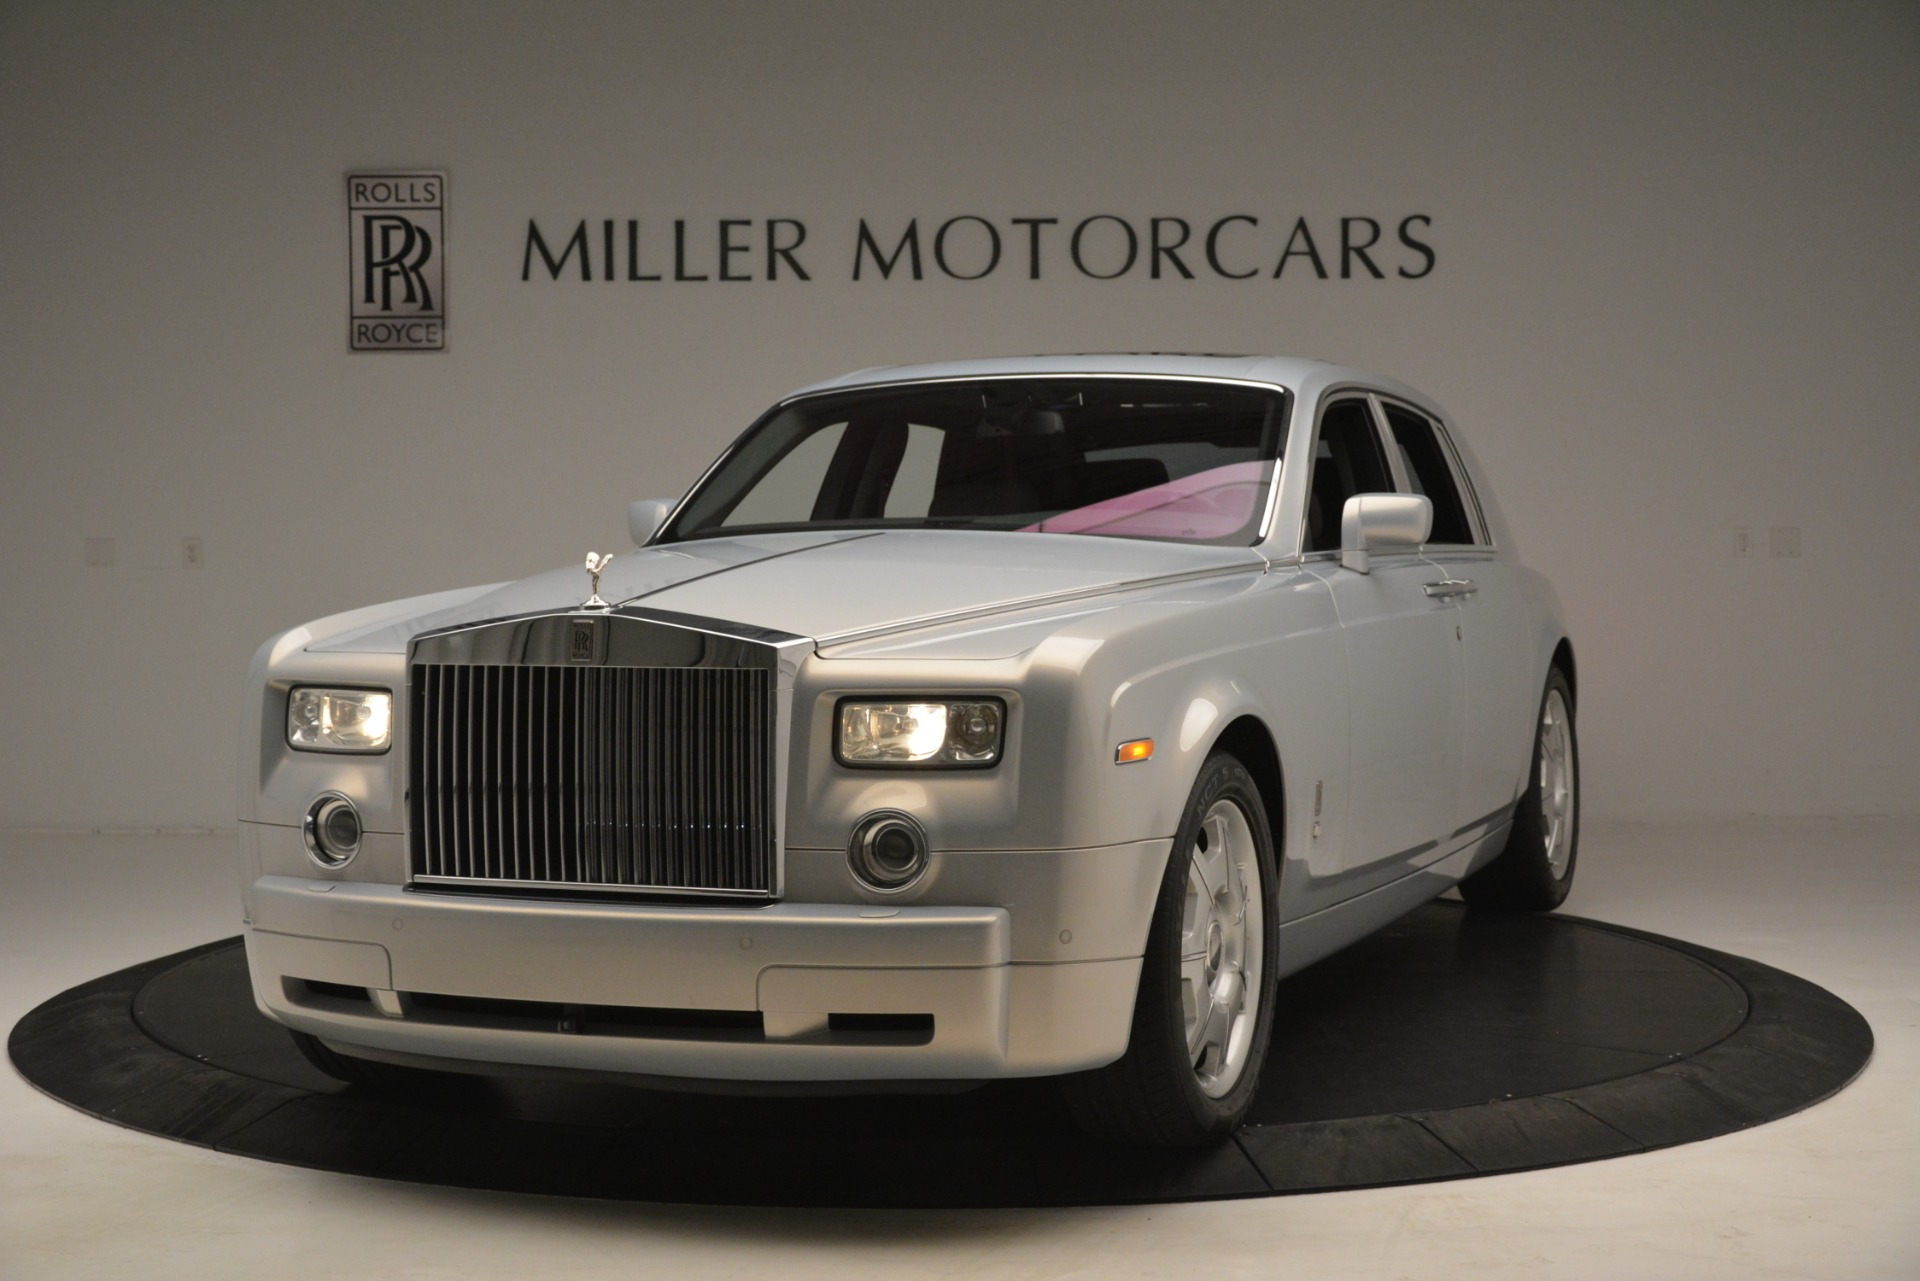 Used 2007 Rolls-Royce Phantom for sale Sold at Pagani of Greenwich in Greenwich CT 06830 1